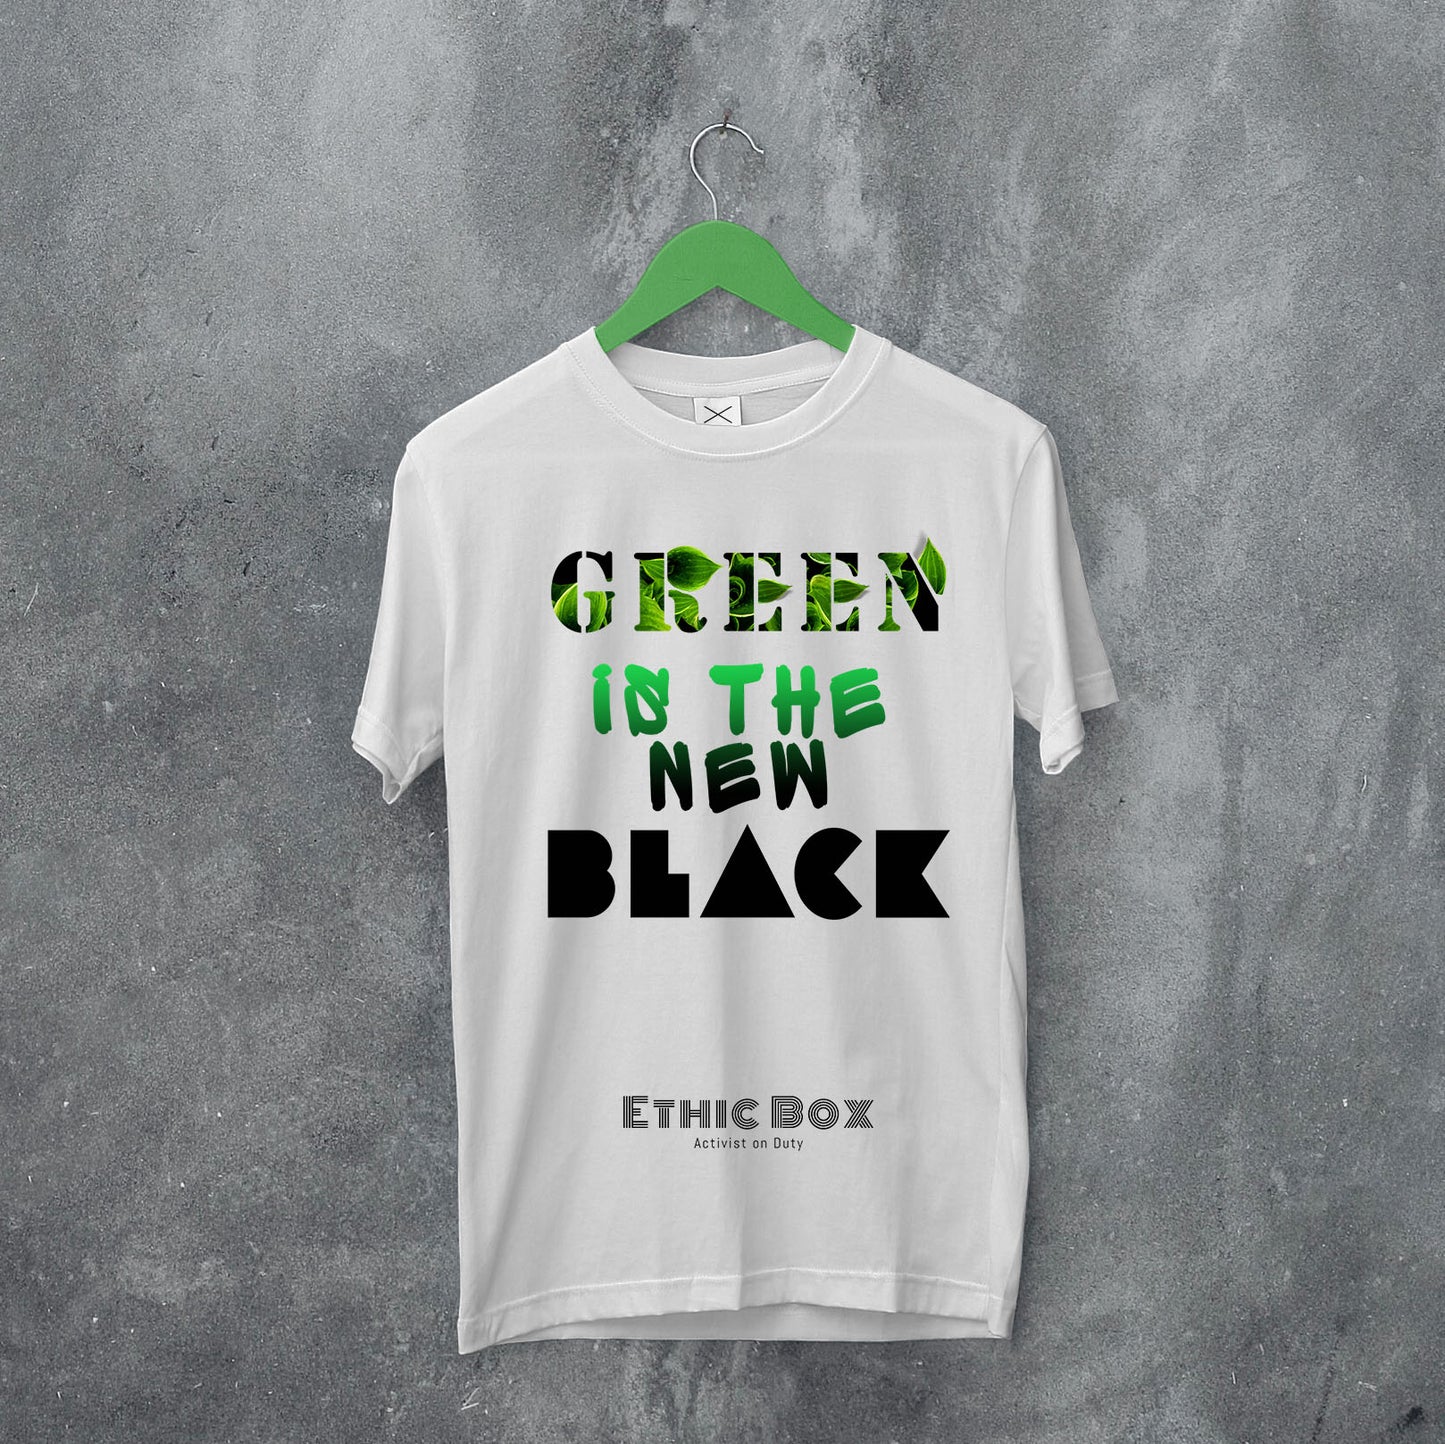 Green is the new Black - Unisex fit